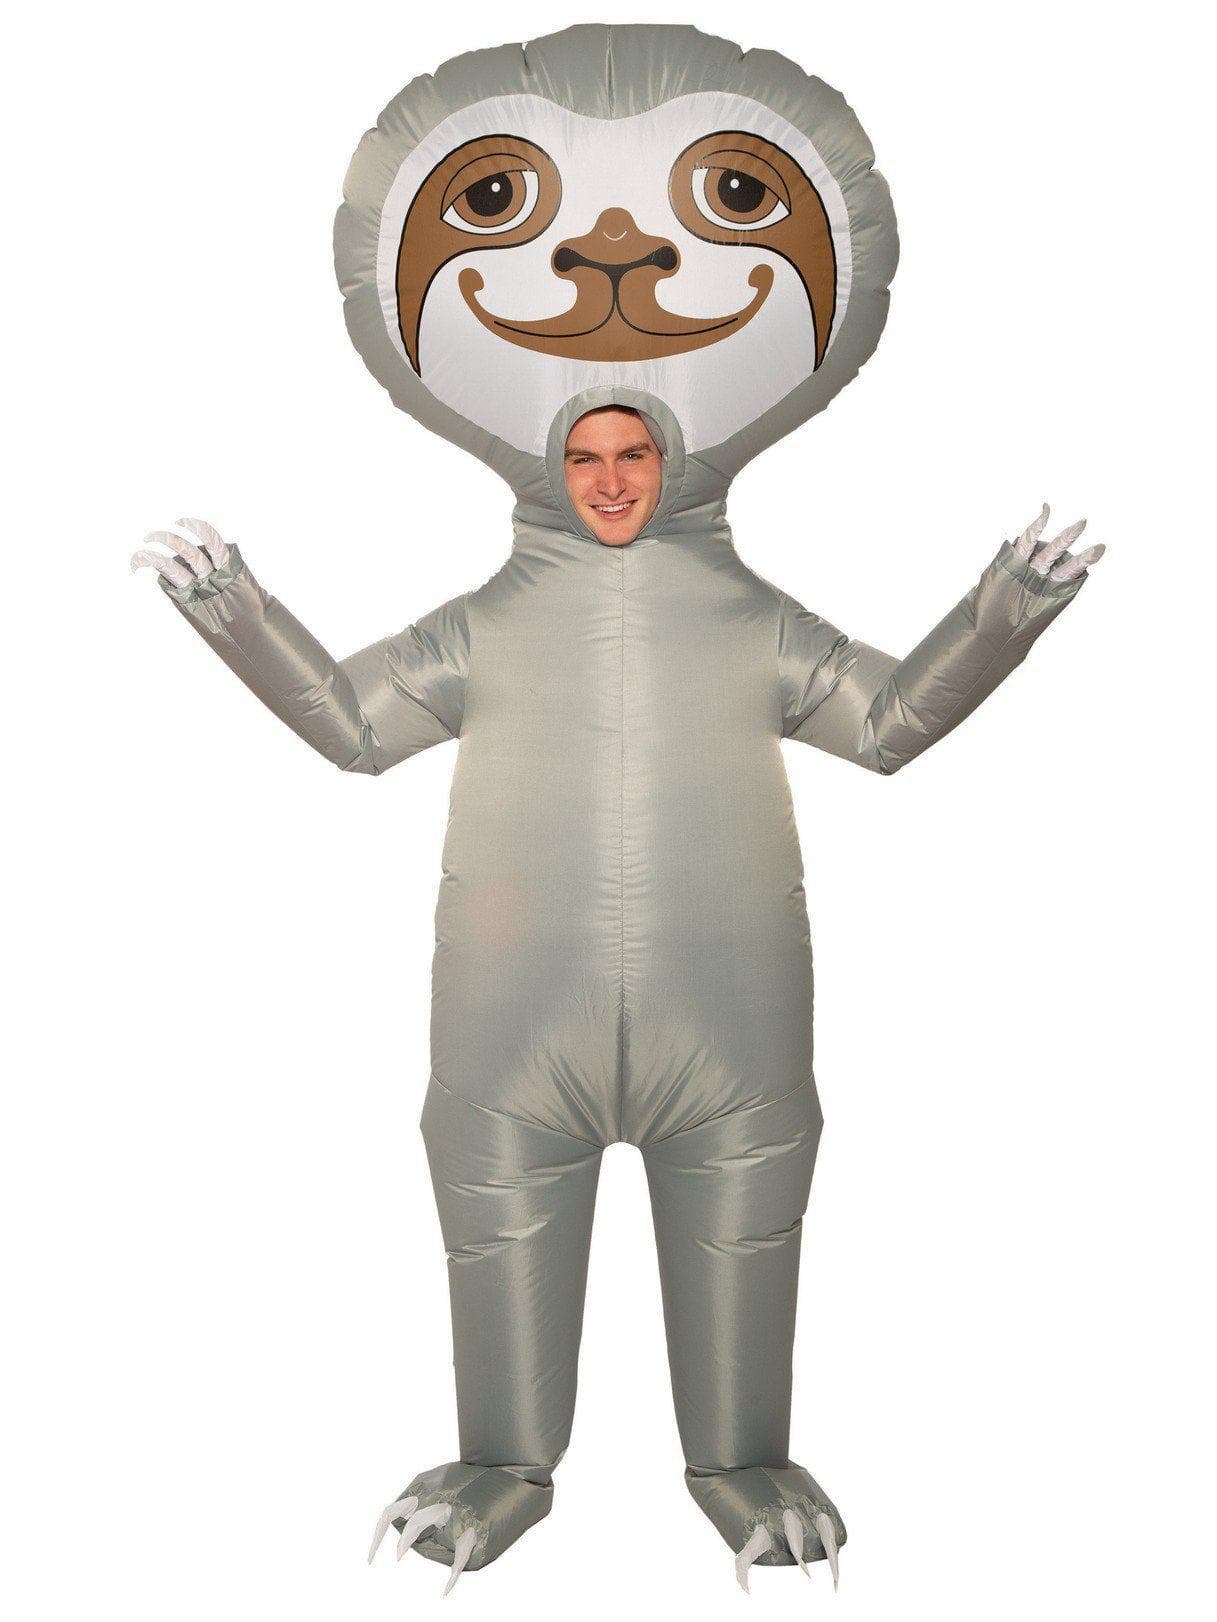 Adult Inflatable Sloth Costume - costumes.com